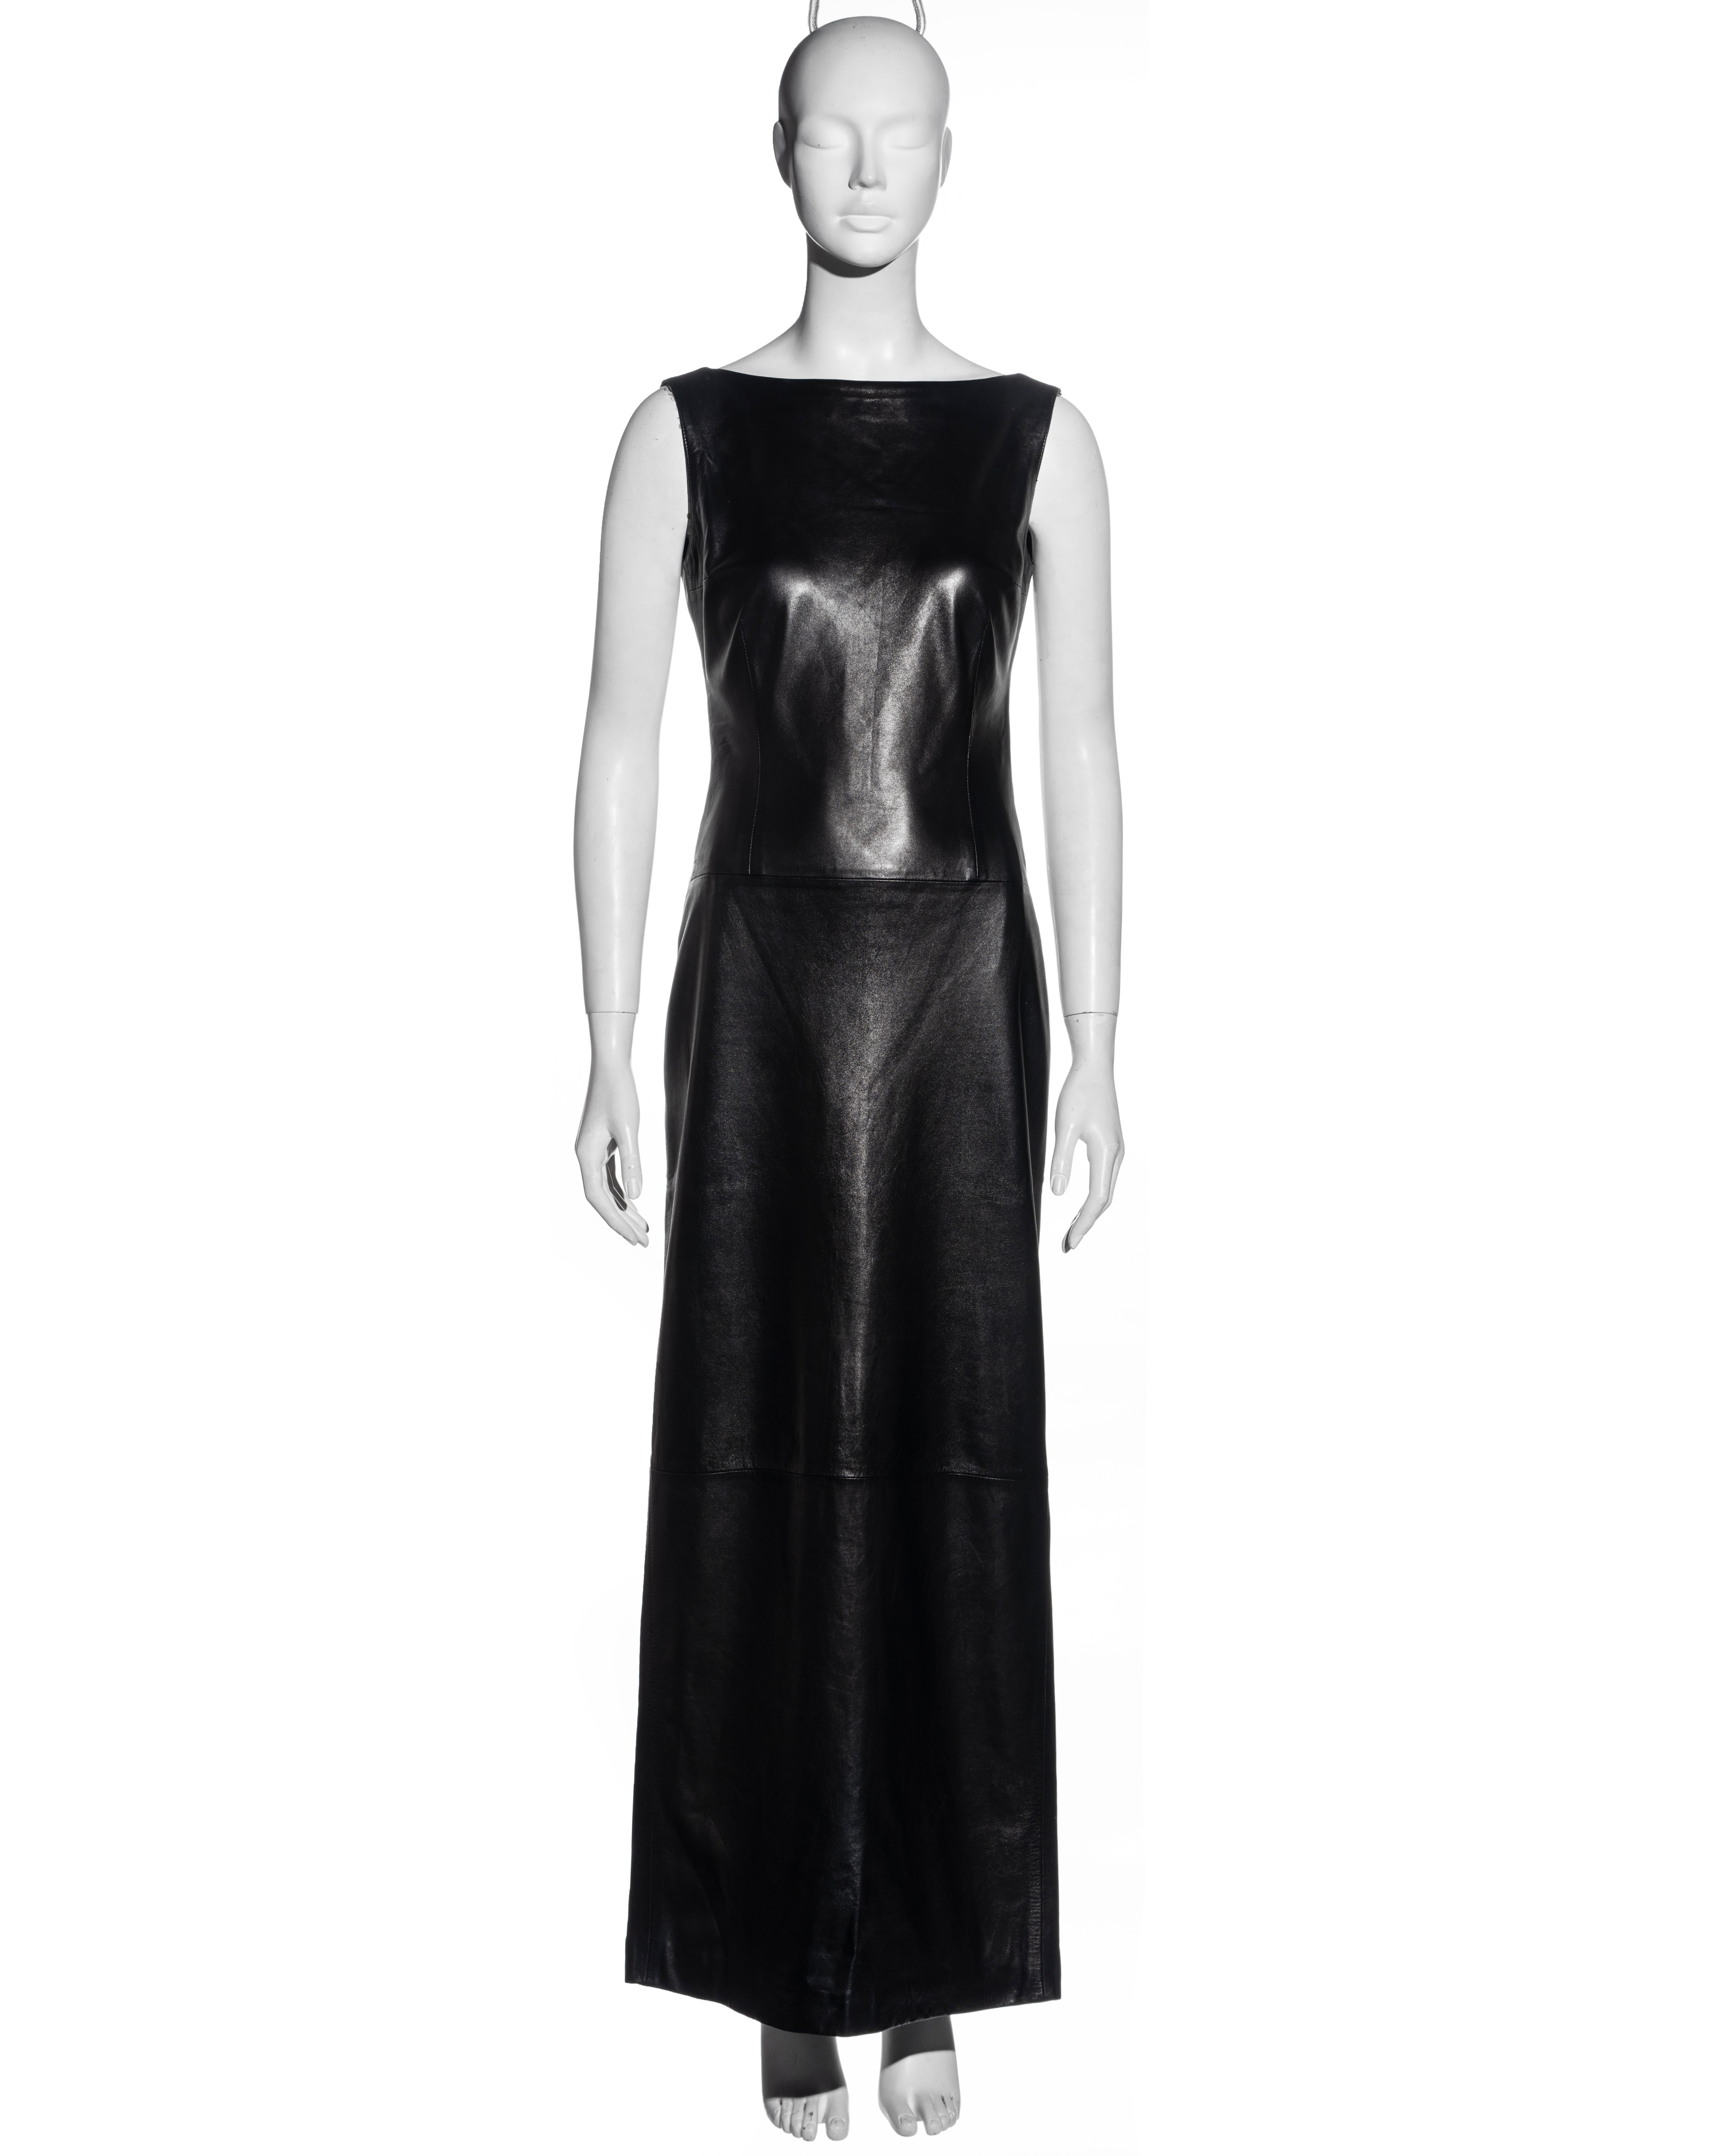 ▪ Mario Valentino black lambskin leather full-length dress
▪ Open back 
▪ Thigh-high back slit 
▪ Boat neck 
▪ IT 42 - FR 38 - UK 10 - US 6
▪ Fall-Winter 1999
▪ 100% Leather
▪ Made in Italy